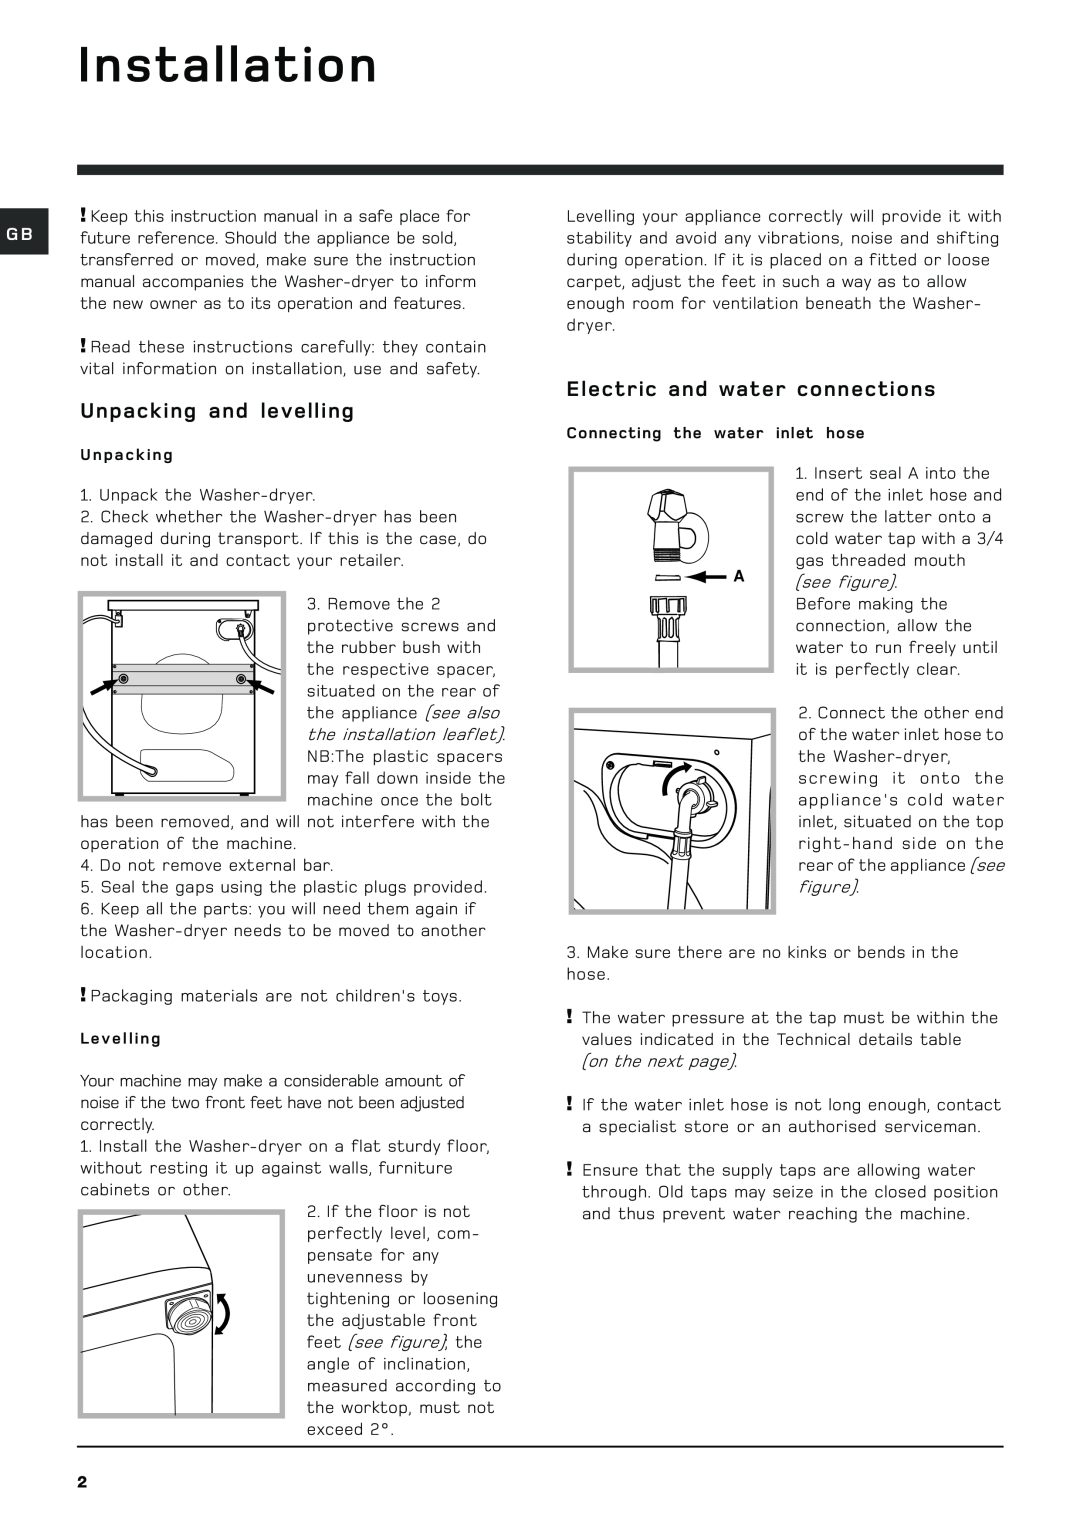 Hotpoint wdd960 manual Installation, Unpacking and levelling, Electric and water connections 